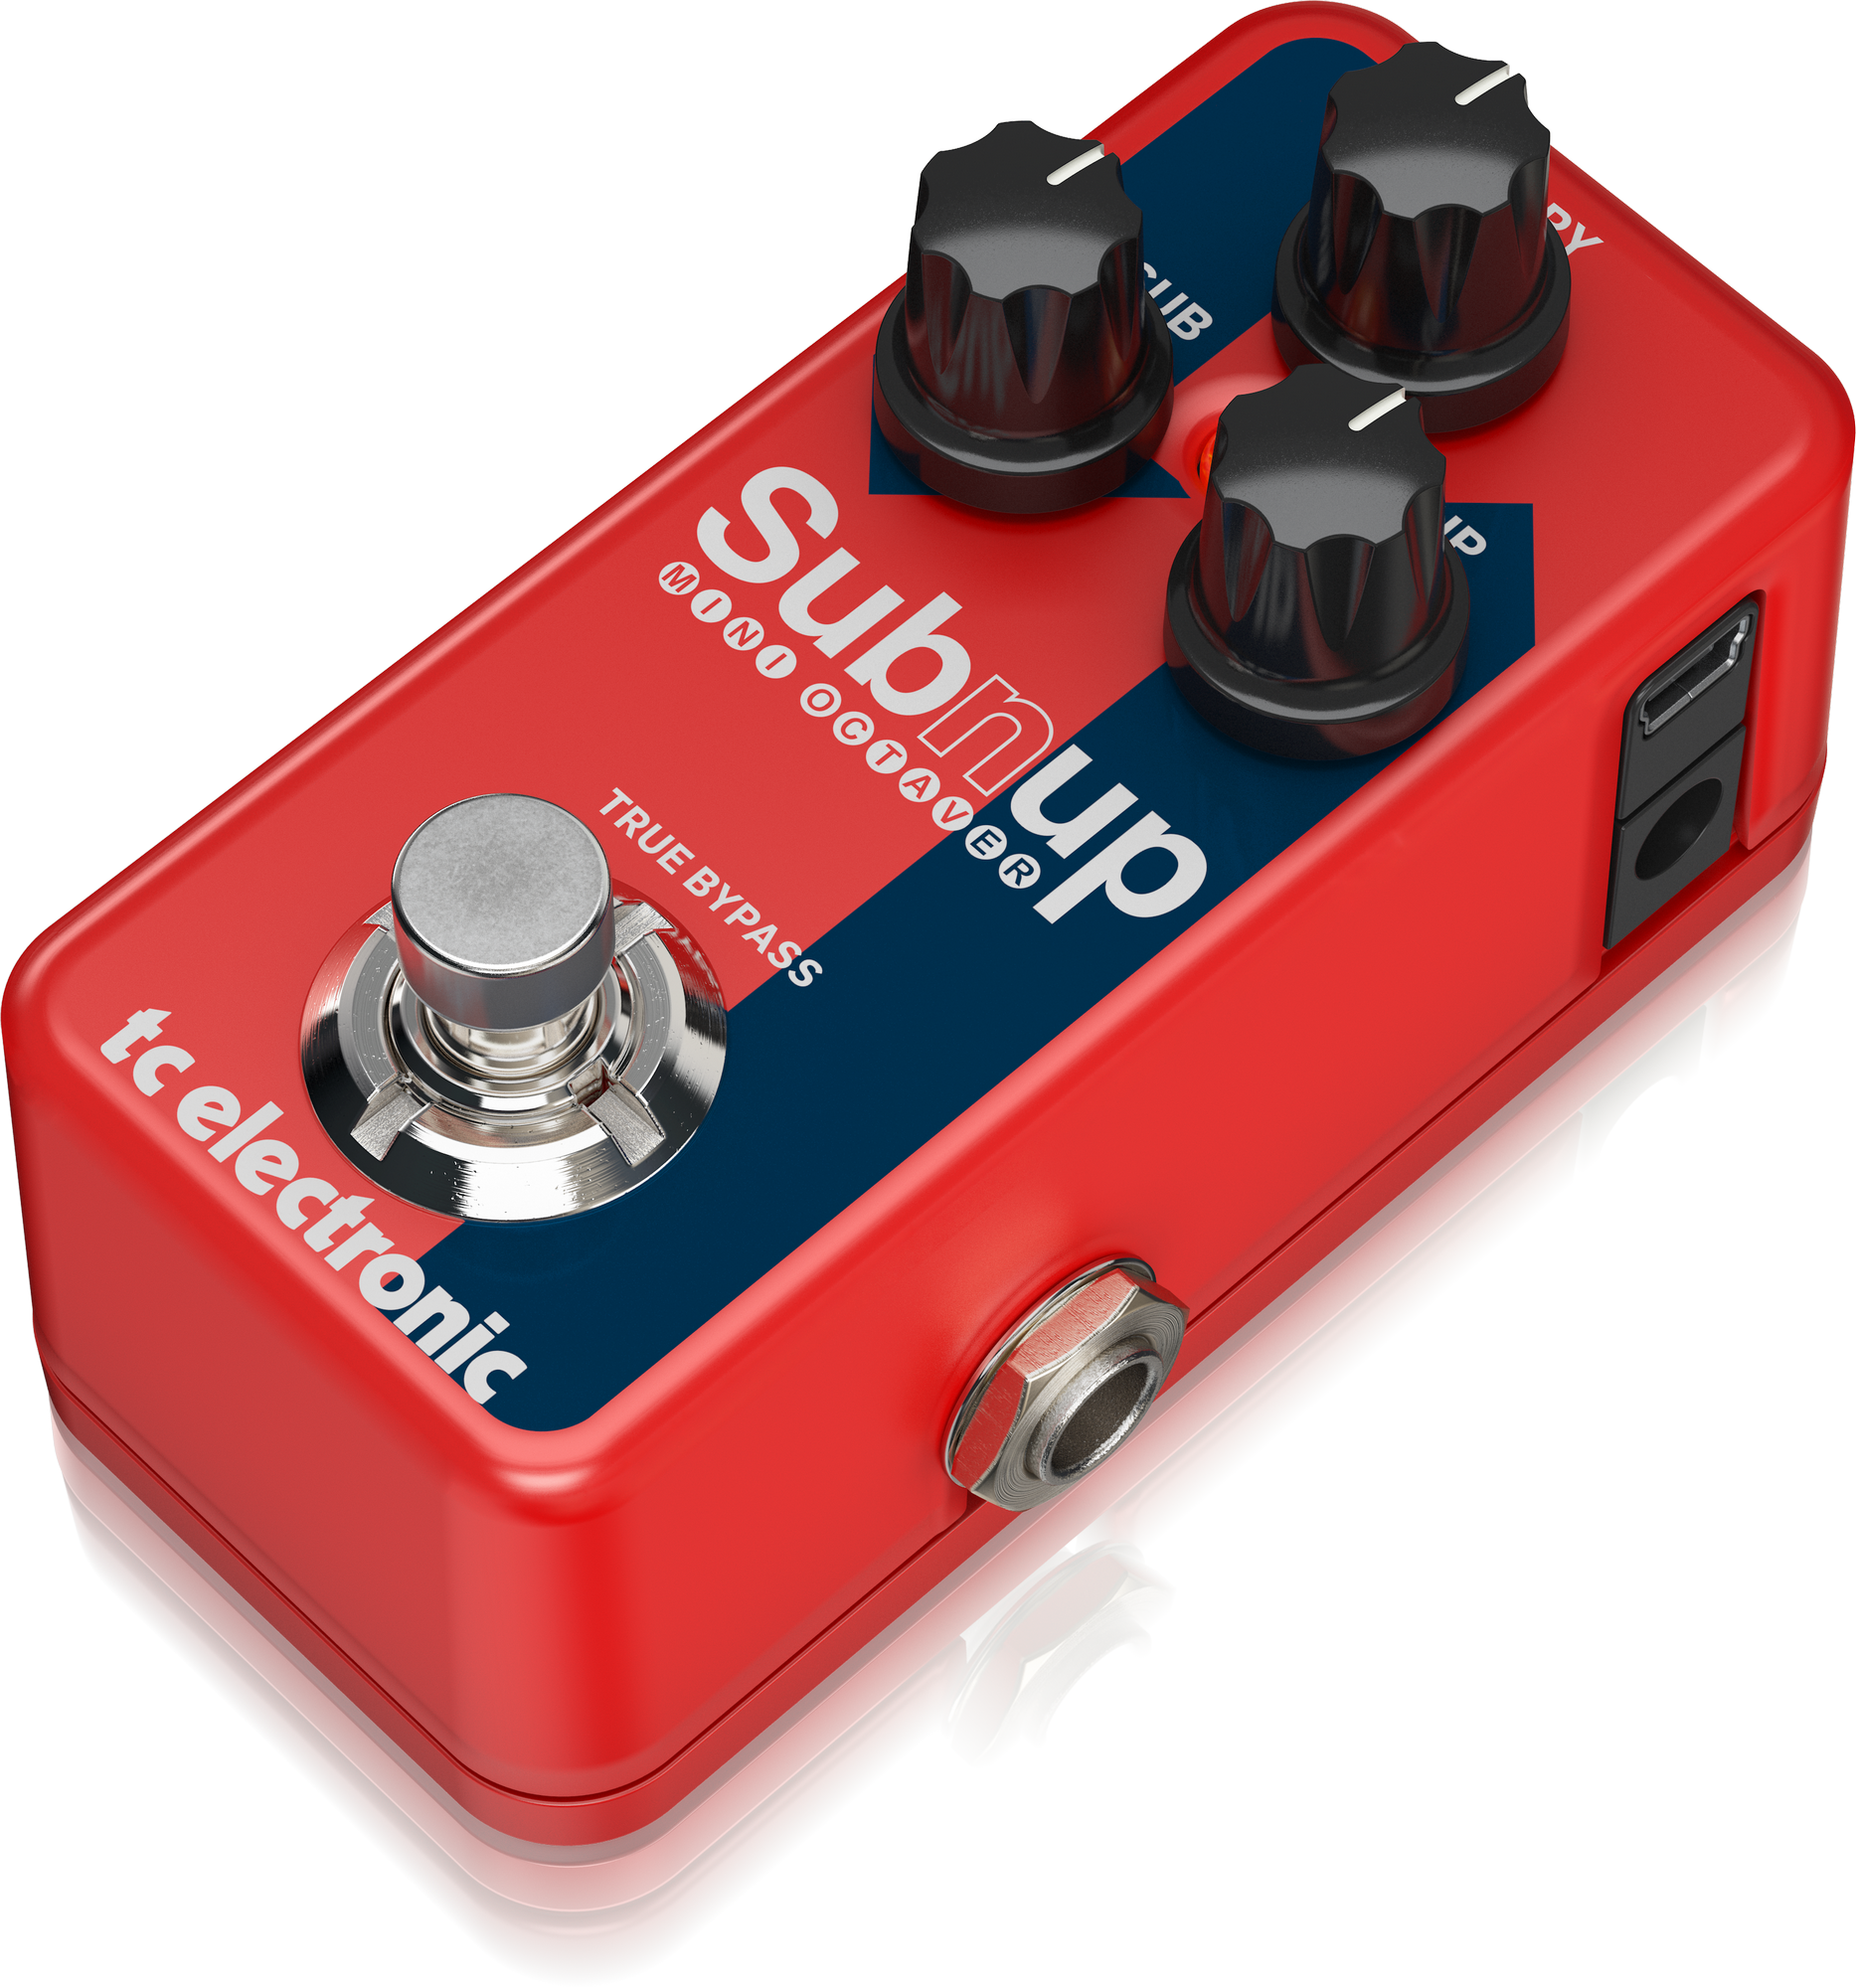 TC Electronic Sub 'n' Up Mini Octaver Compact Version Of Hugely Popular Sub 'n' Up Octaver With Advanced Polyponic Octave Engine And Toneprint-enabled Technology For Easy Custom Effects, TC ELECTRONIC, EFFECTS, tc-electronic-effects-tc-sub-n-up-mini-octaver, ZOSO MUSIC SDN BHD